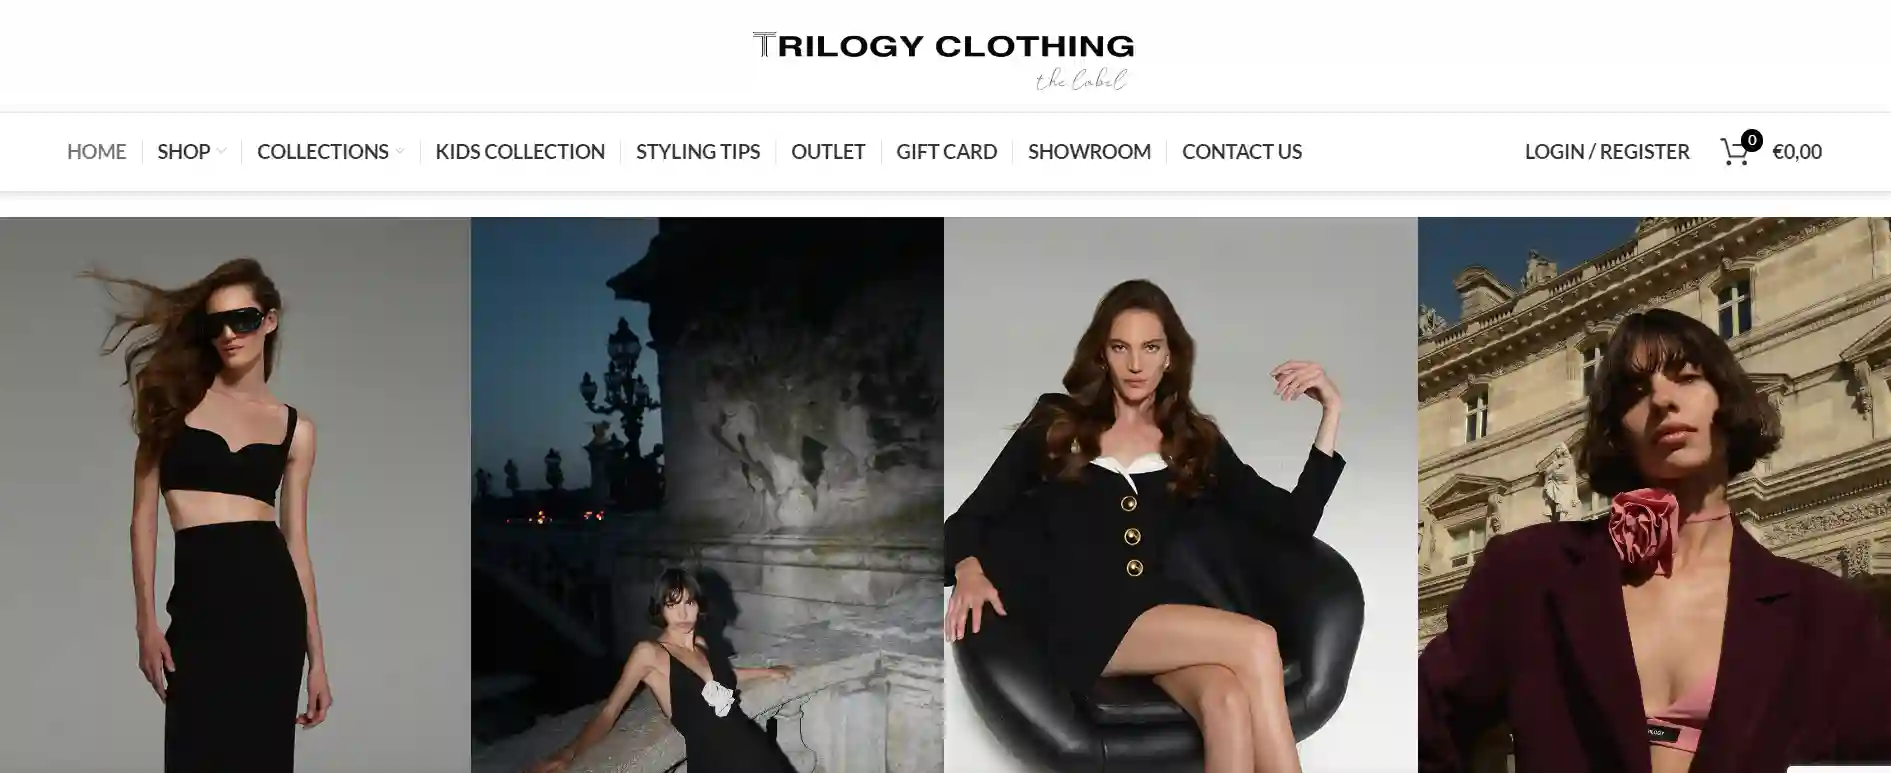 You are currently viewing Trilogy Clothing Reviews: Scam or Legit? An In-Depth Look